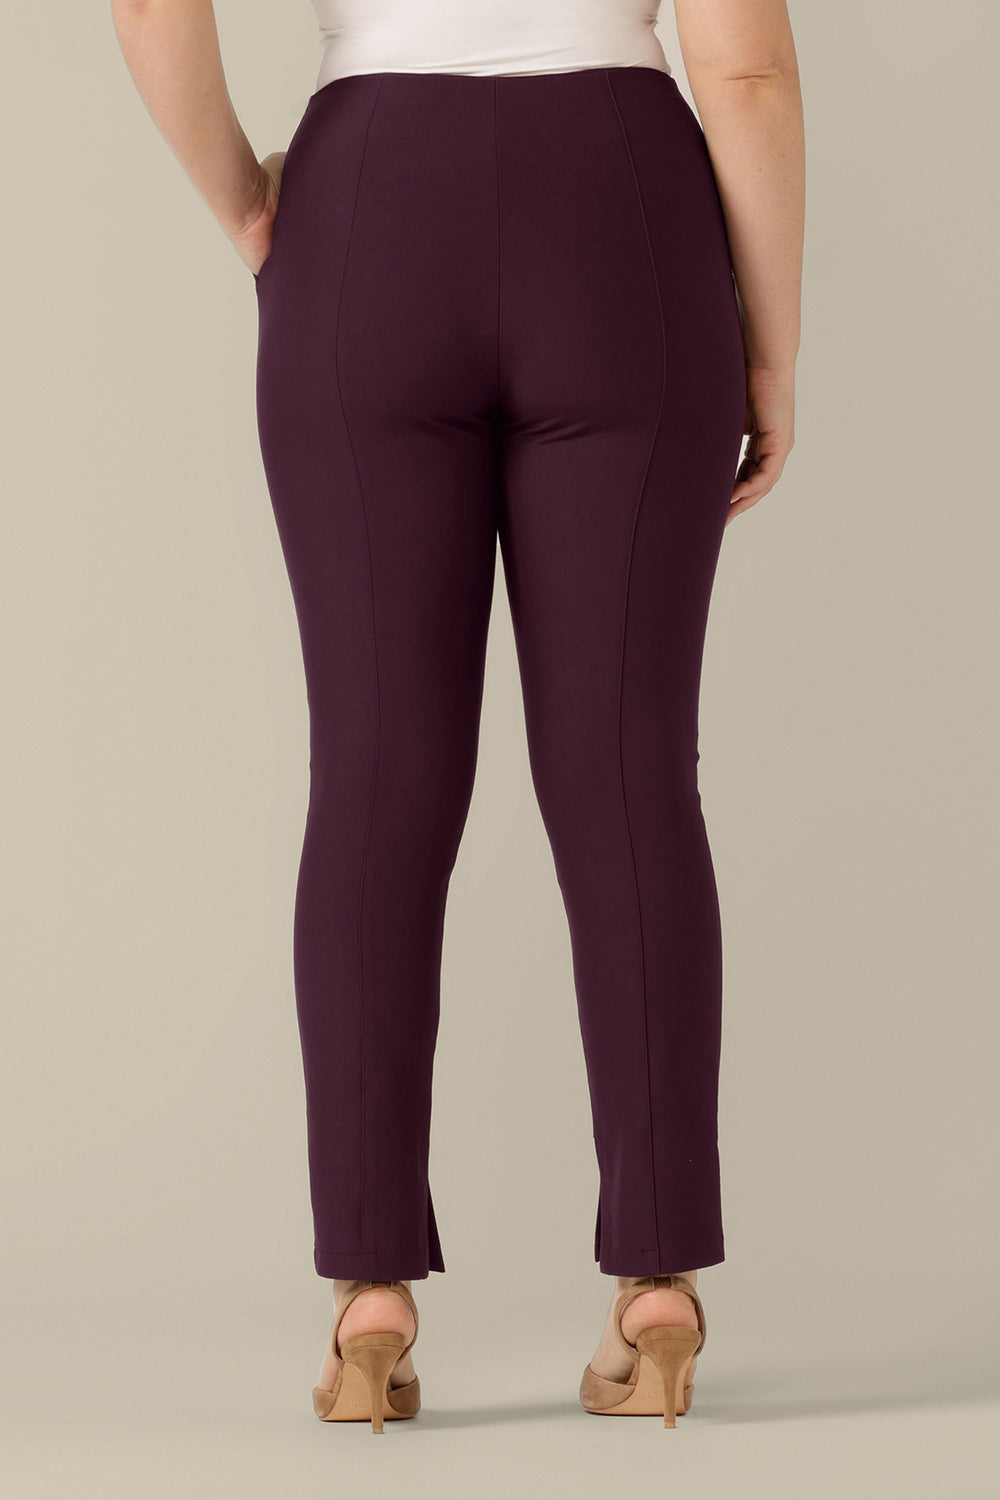  Back view of mid-rise, slim leg pants in mulberry ponte jersey, size 12, by Australia and New Zealand women's clothing brand, L&F. Good corporate wear pants, these comfortable trousers are made to fit an inclusive size range of sizes 8 to 24.